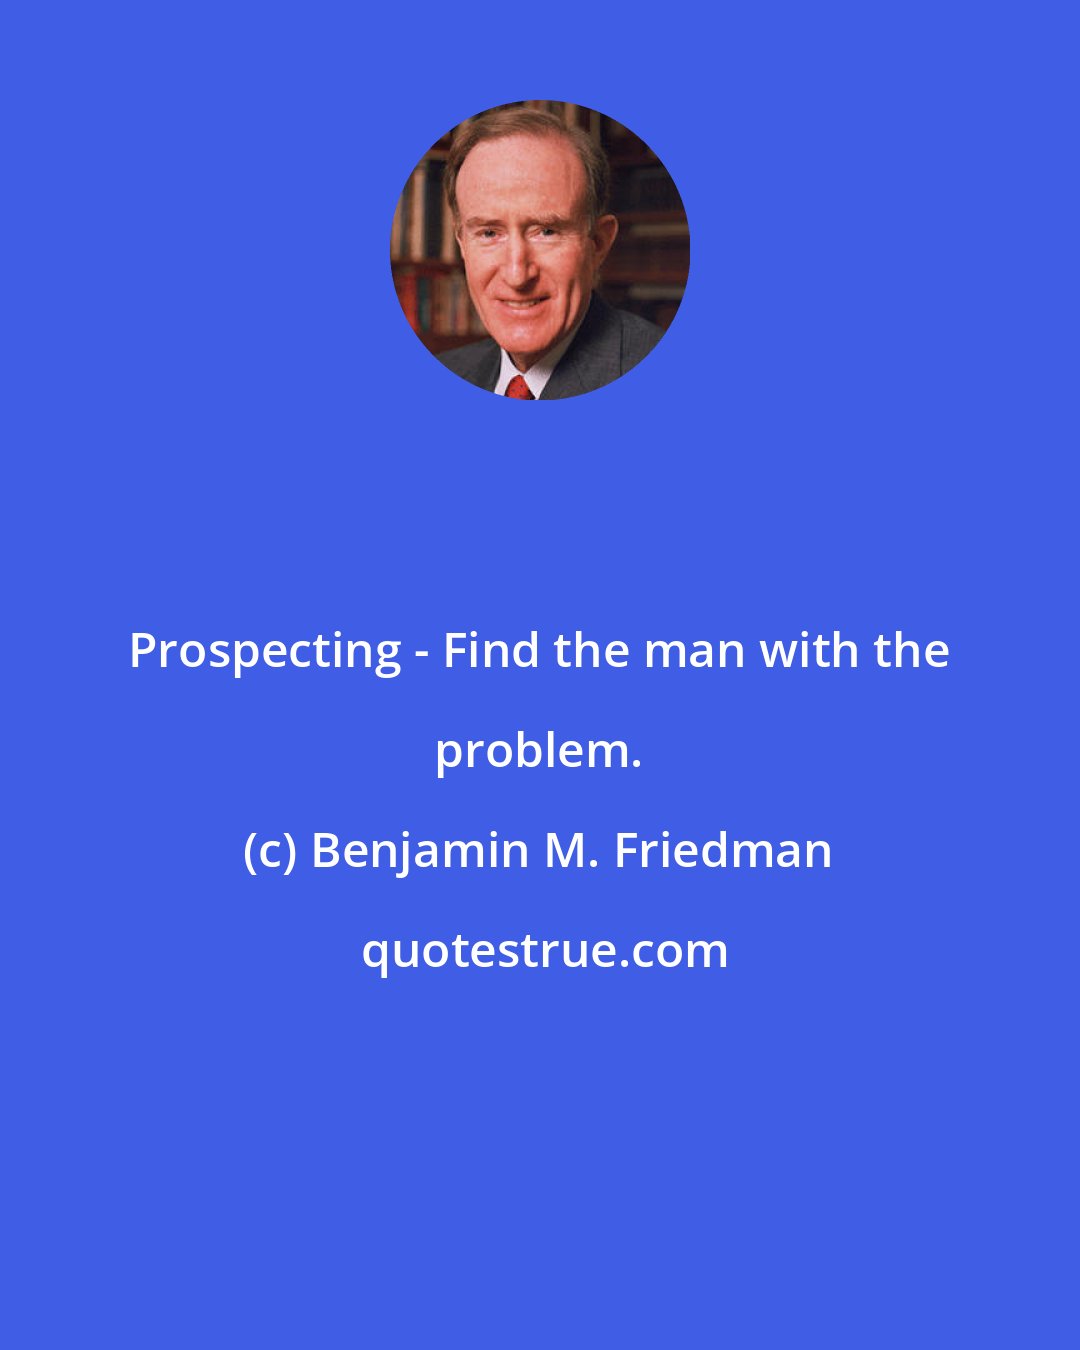 Benjamin M. Friedman: Prospecting - Find the man with the problem.